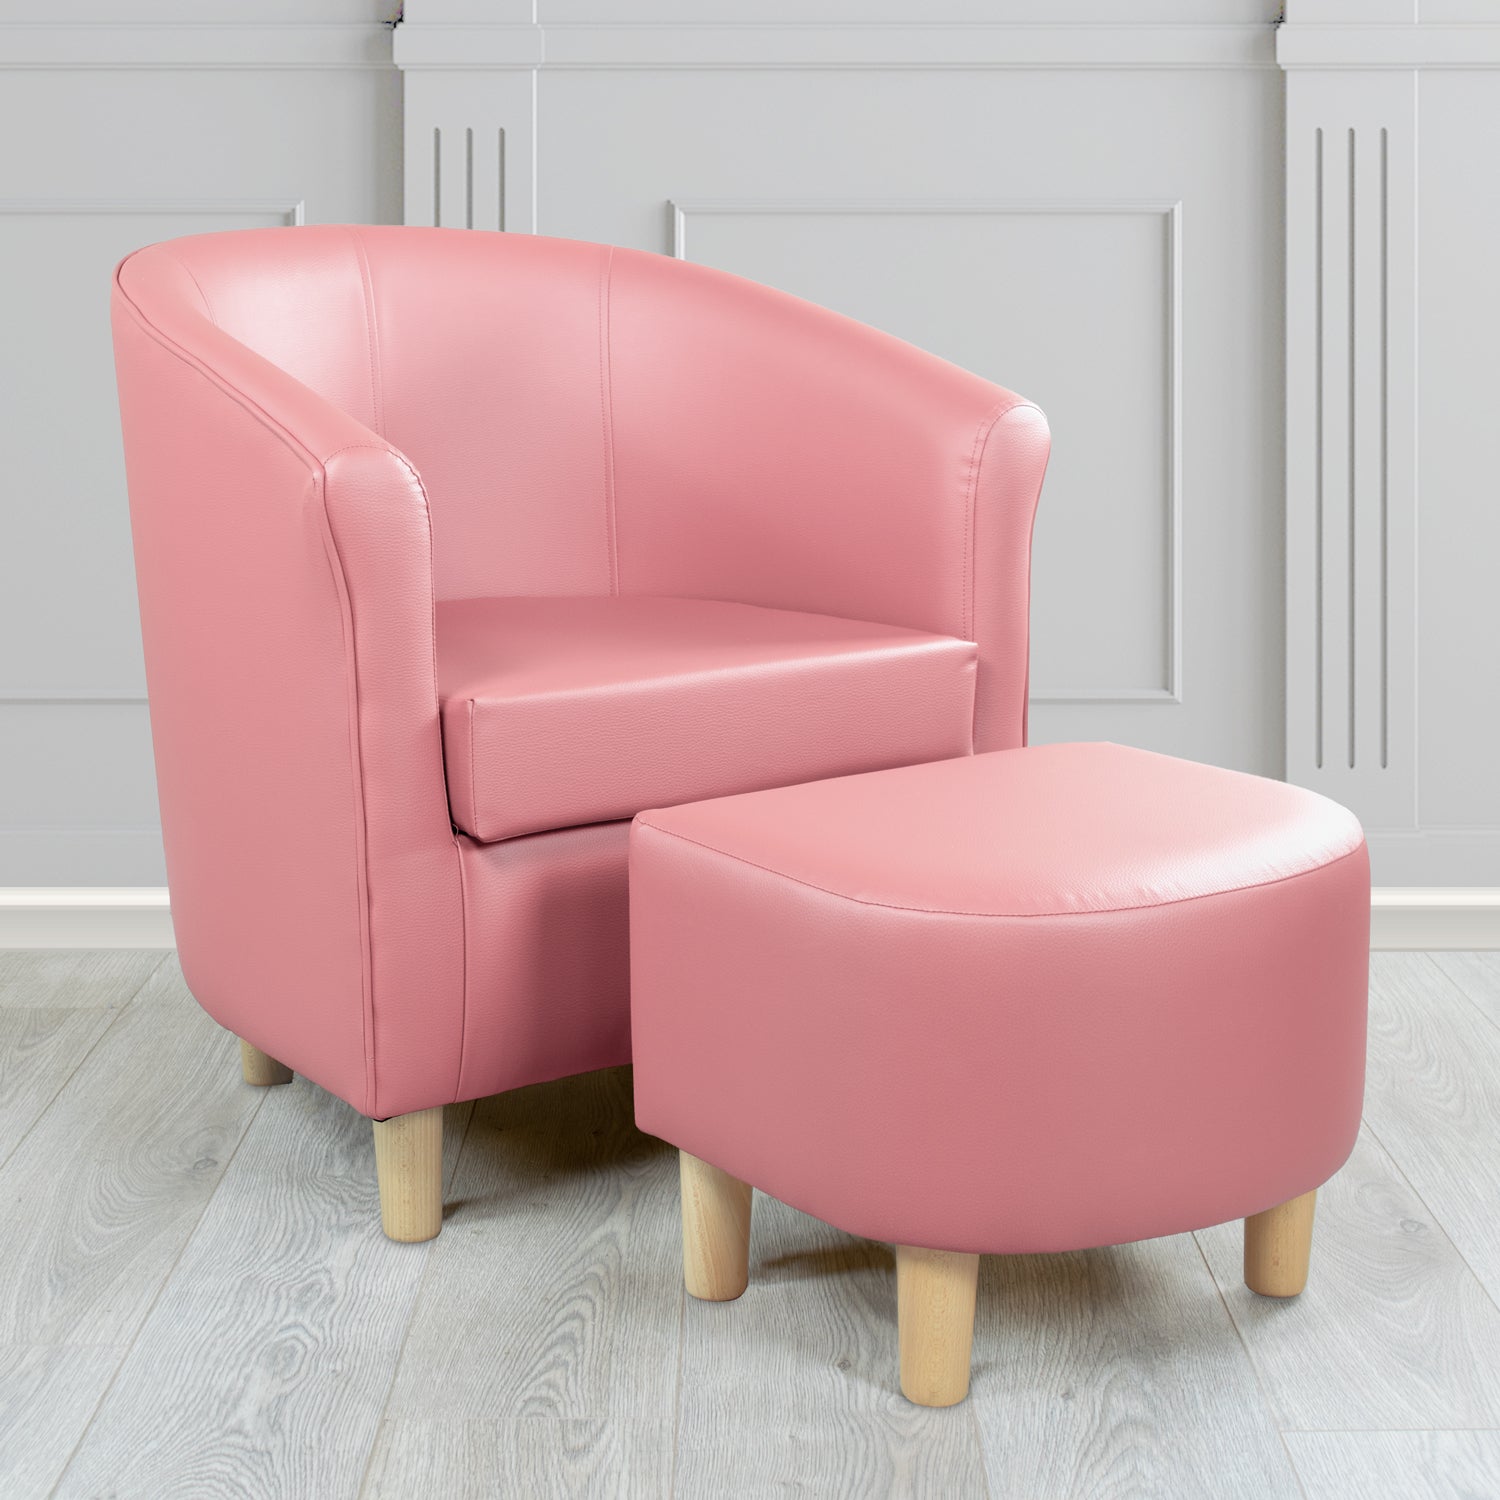 Tuscany Just Colour Cherry Blossom Faux Leather Tub Chair with Dee Footstool Set - The Tub Chair Shop